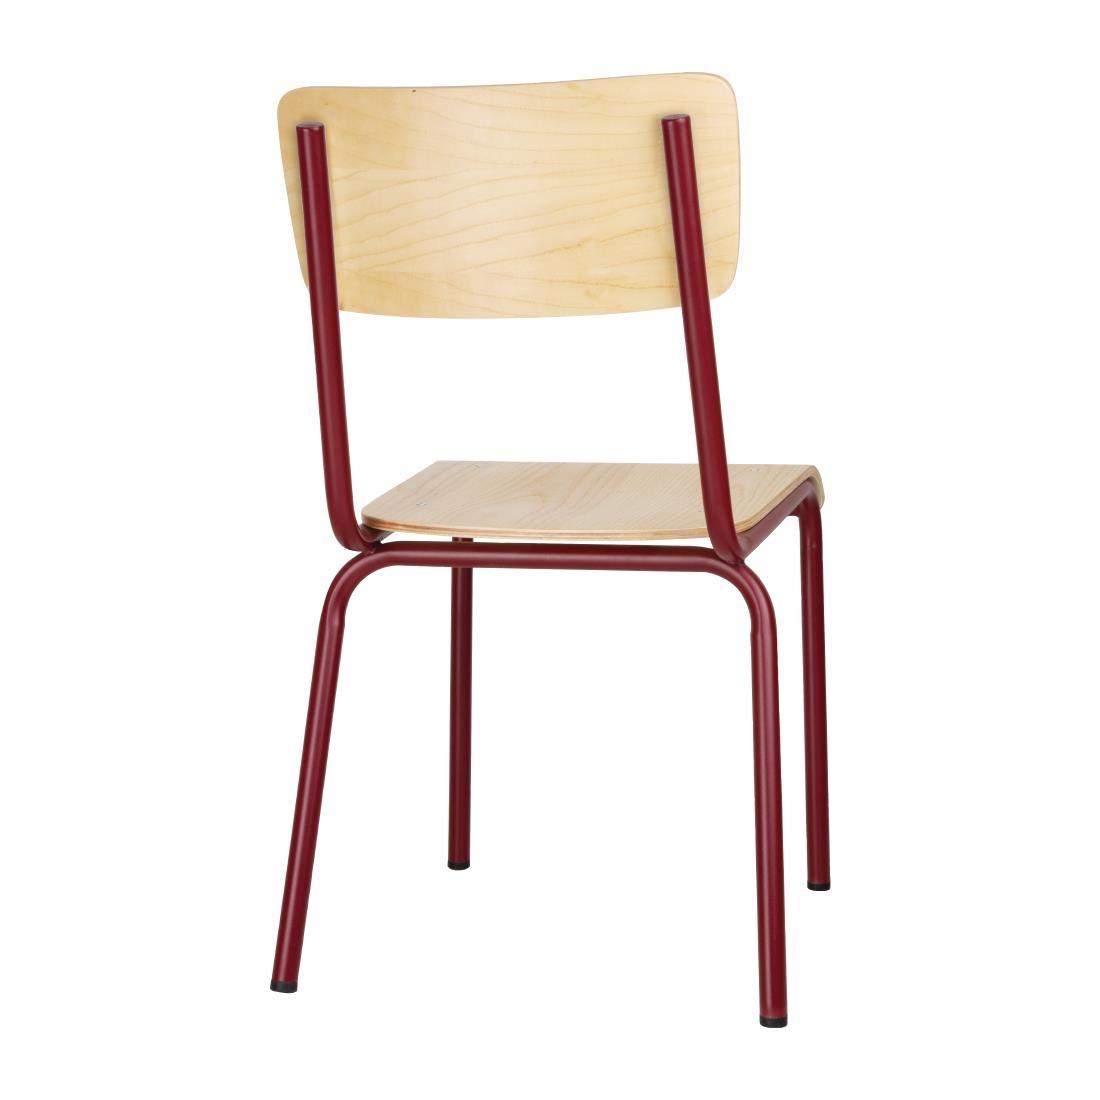 Bolero Cantina Side Chairs with Wooden Seat Pad and Backrest Wine Red (Pack of 4) - FB943  - 3